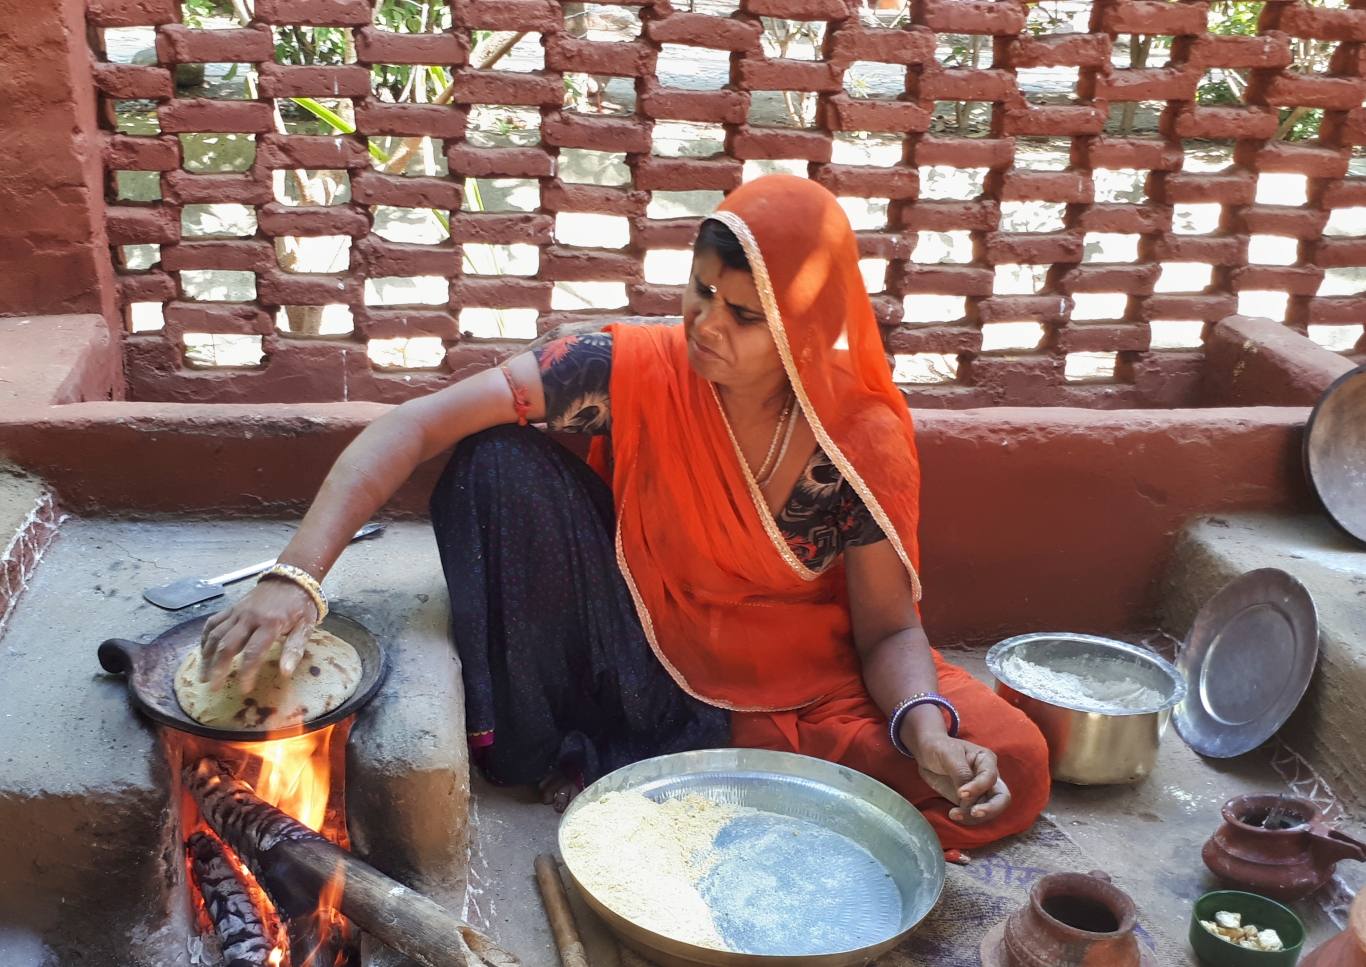 Lady cooking rajasthan cusine over open fire